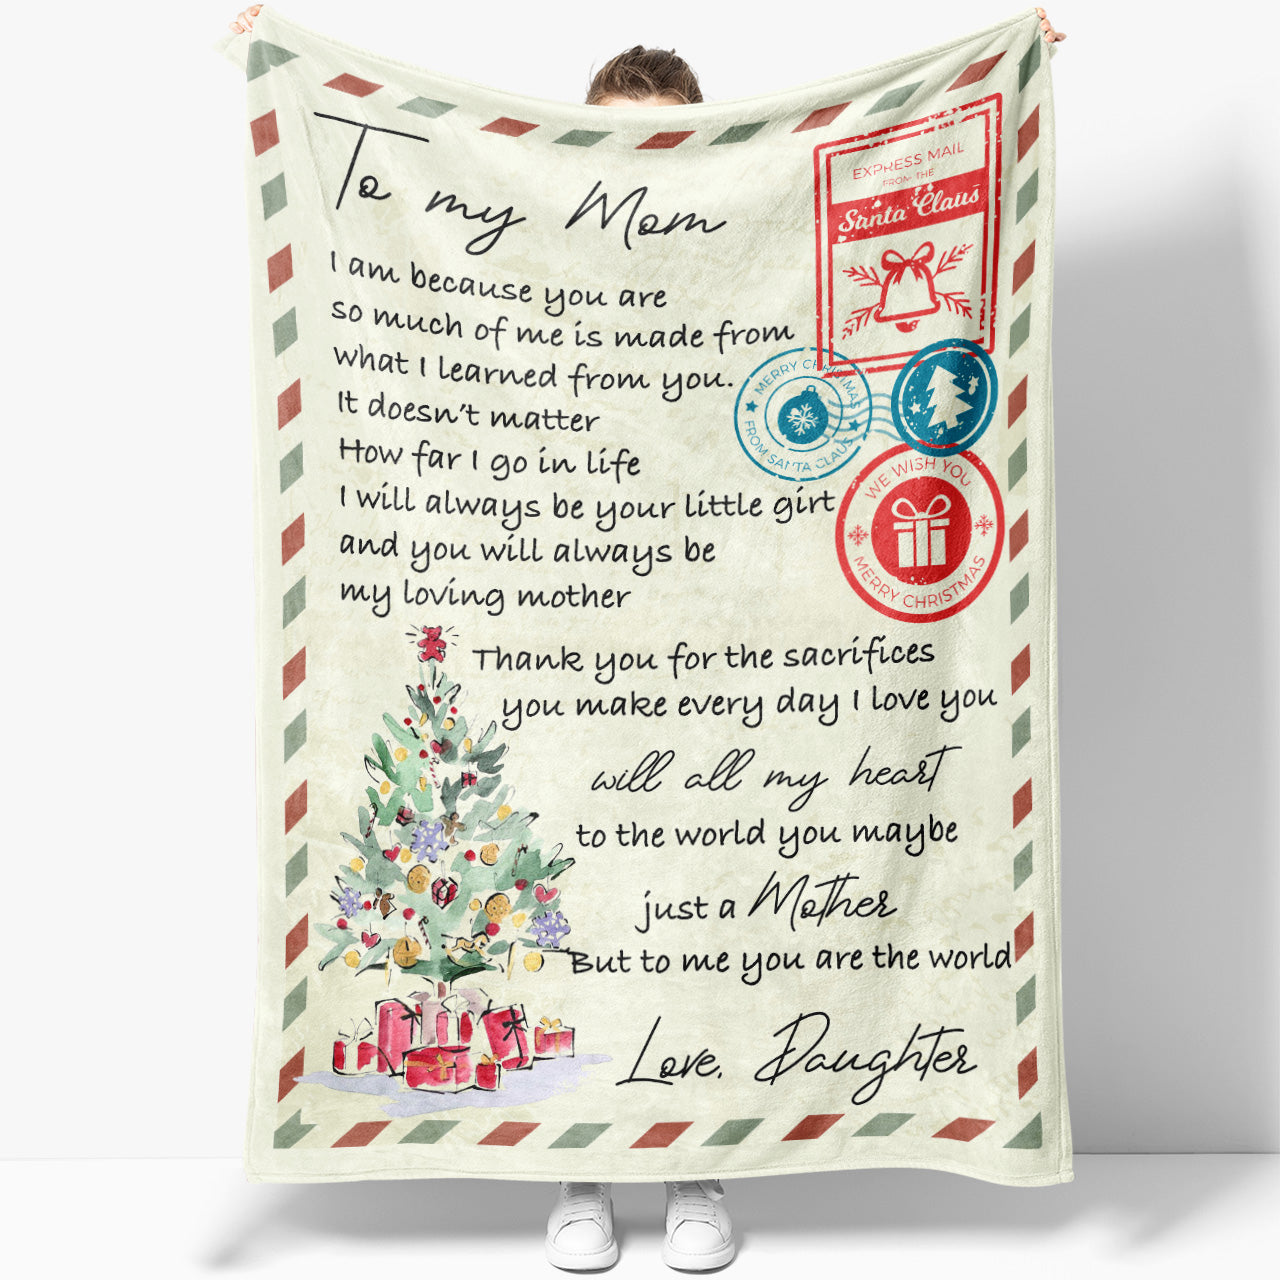 Blanket Gift ideas For Mom, Christmas Gifts For Mom, Its Not Easy Mothers  Day Gifts, Personalized Mothers Day Gifts, A Good Nice Mothers Day Gifts -  Sweet Family Gift